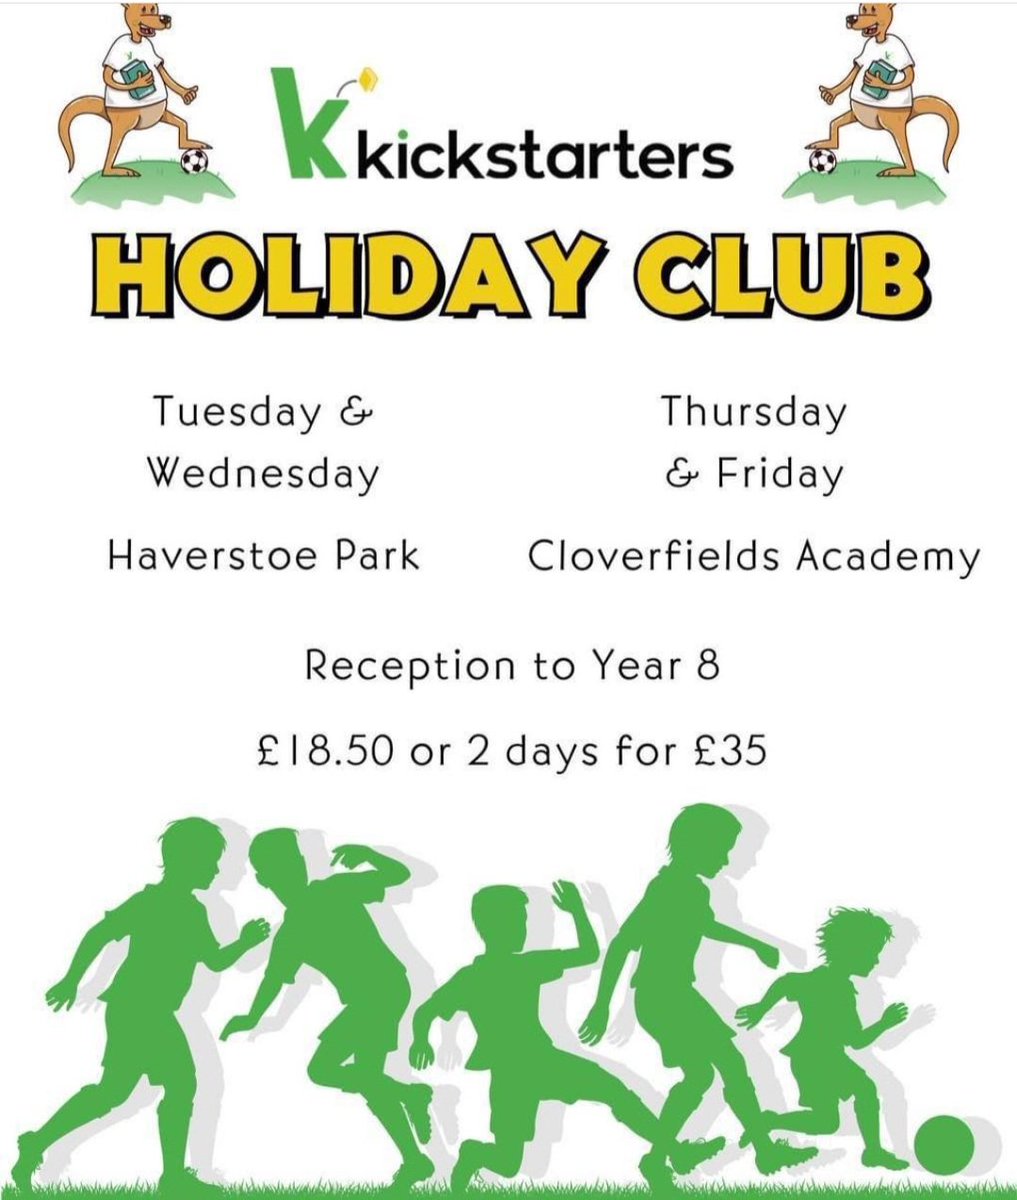 This half-term, why not check out the Kickstarters holiday club! @DeltaStrand @NELINCSSSP @YourSchoolGames #Active @nealwatts1 @NELCouncil